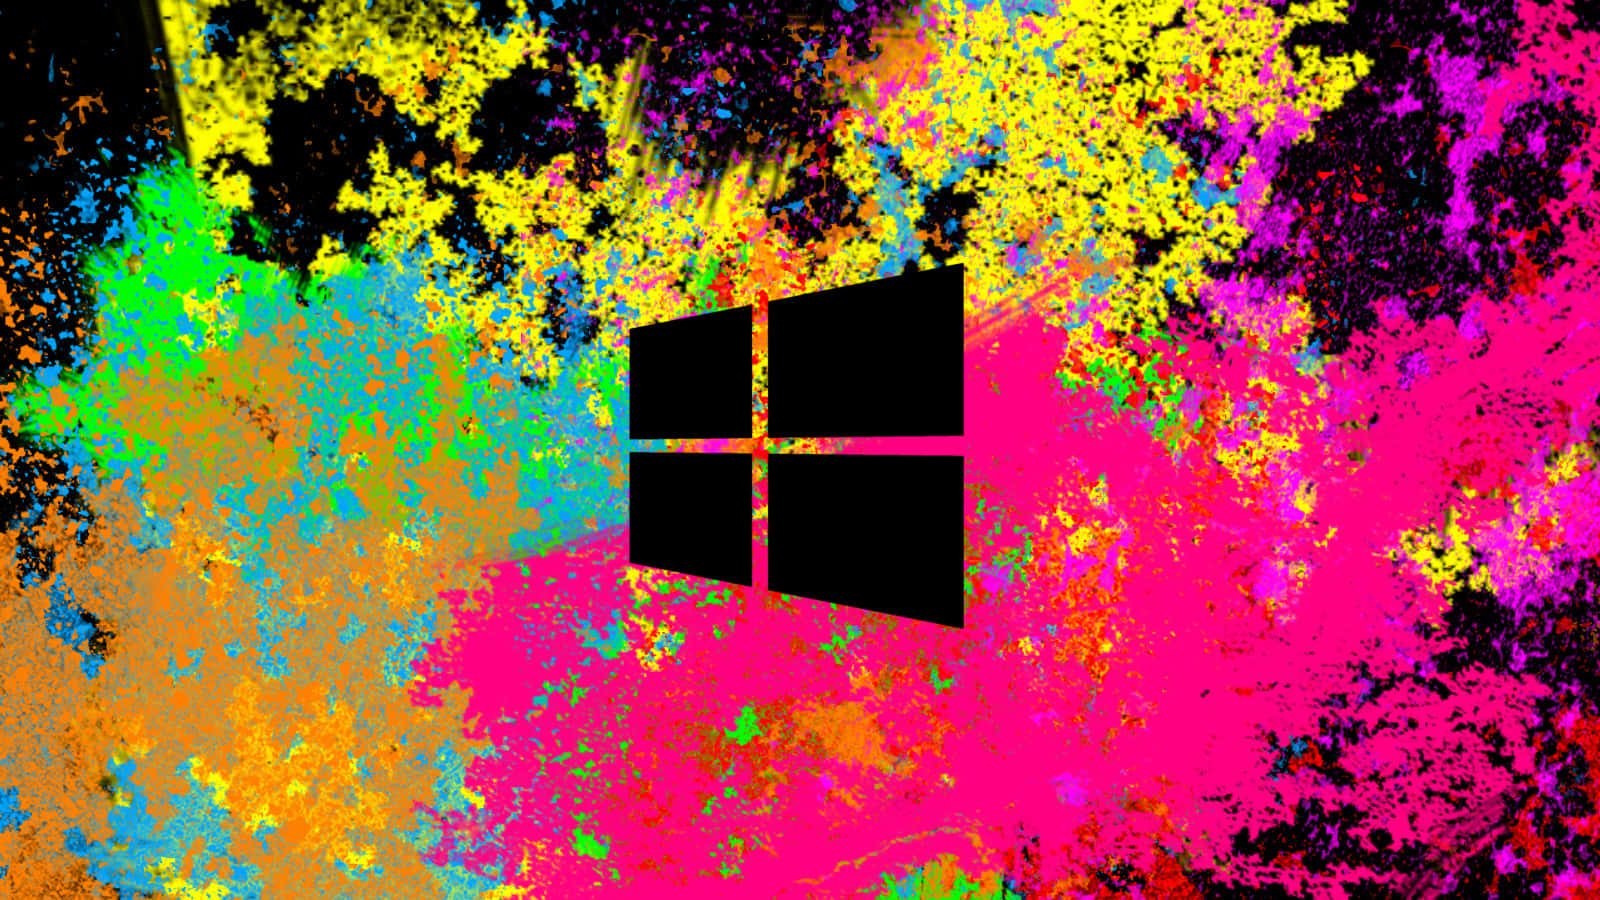 Windows 8.1 Colorful Abstract Wallpaper